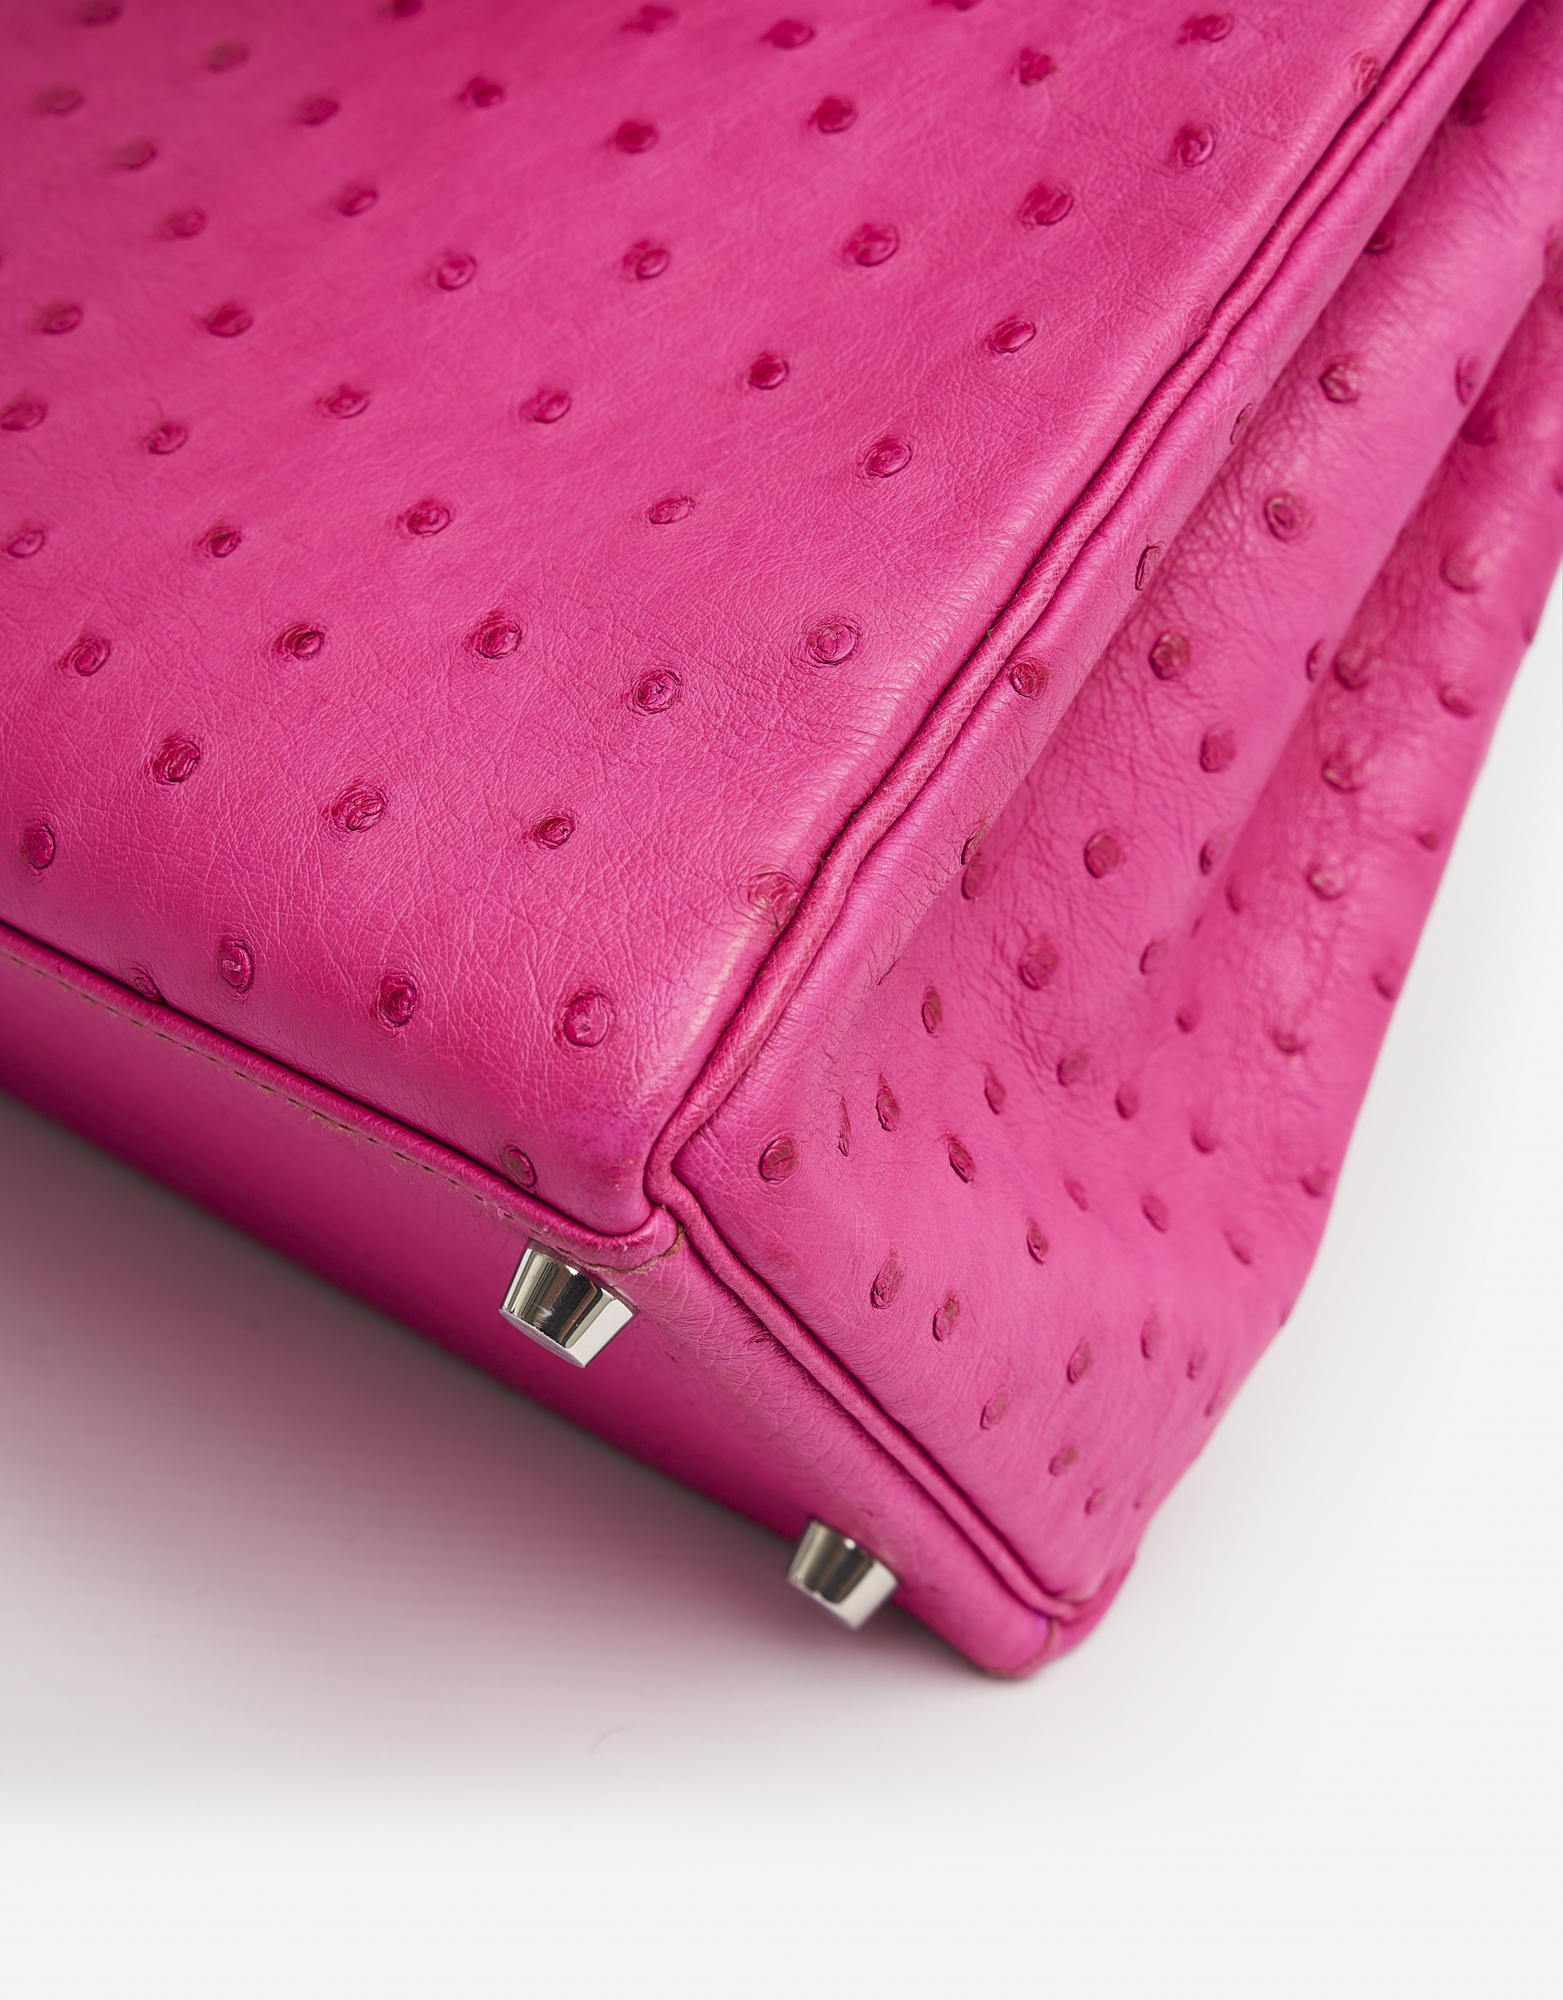 Hermès Kelly Pochette Clutch Fuchsia Ostrich PHW from 100% authentic  materials!